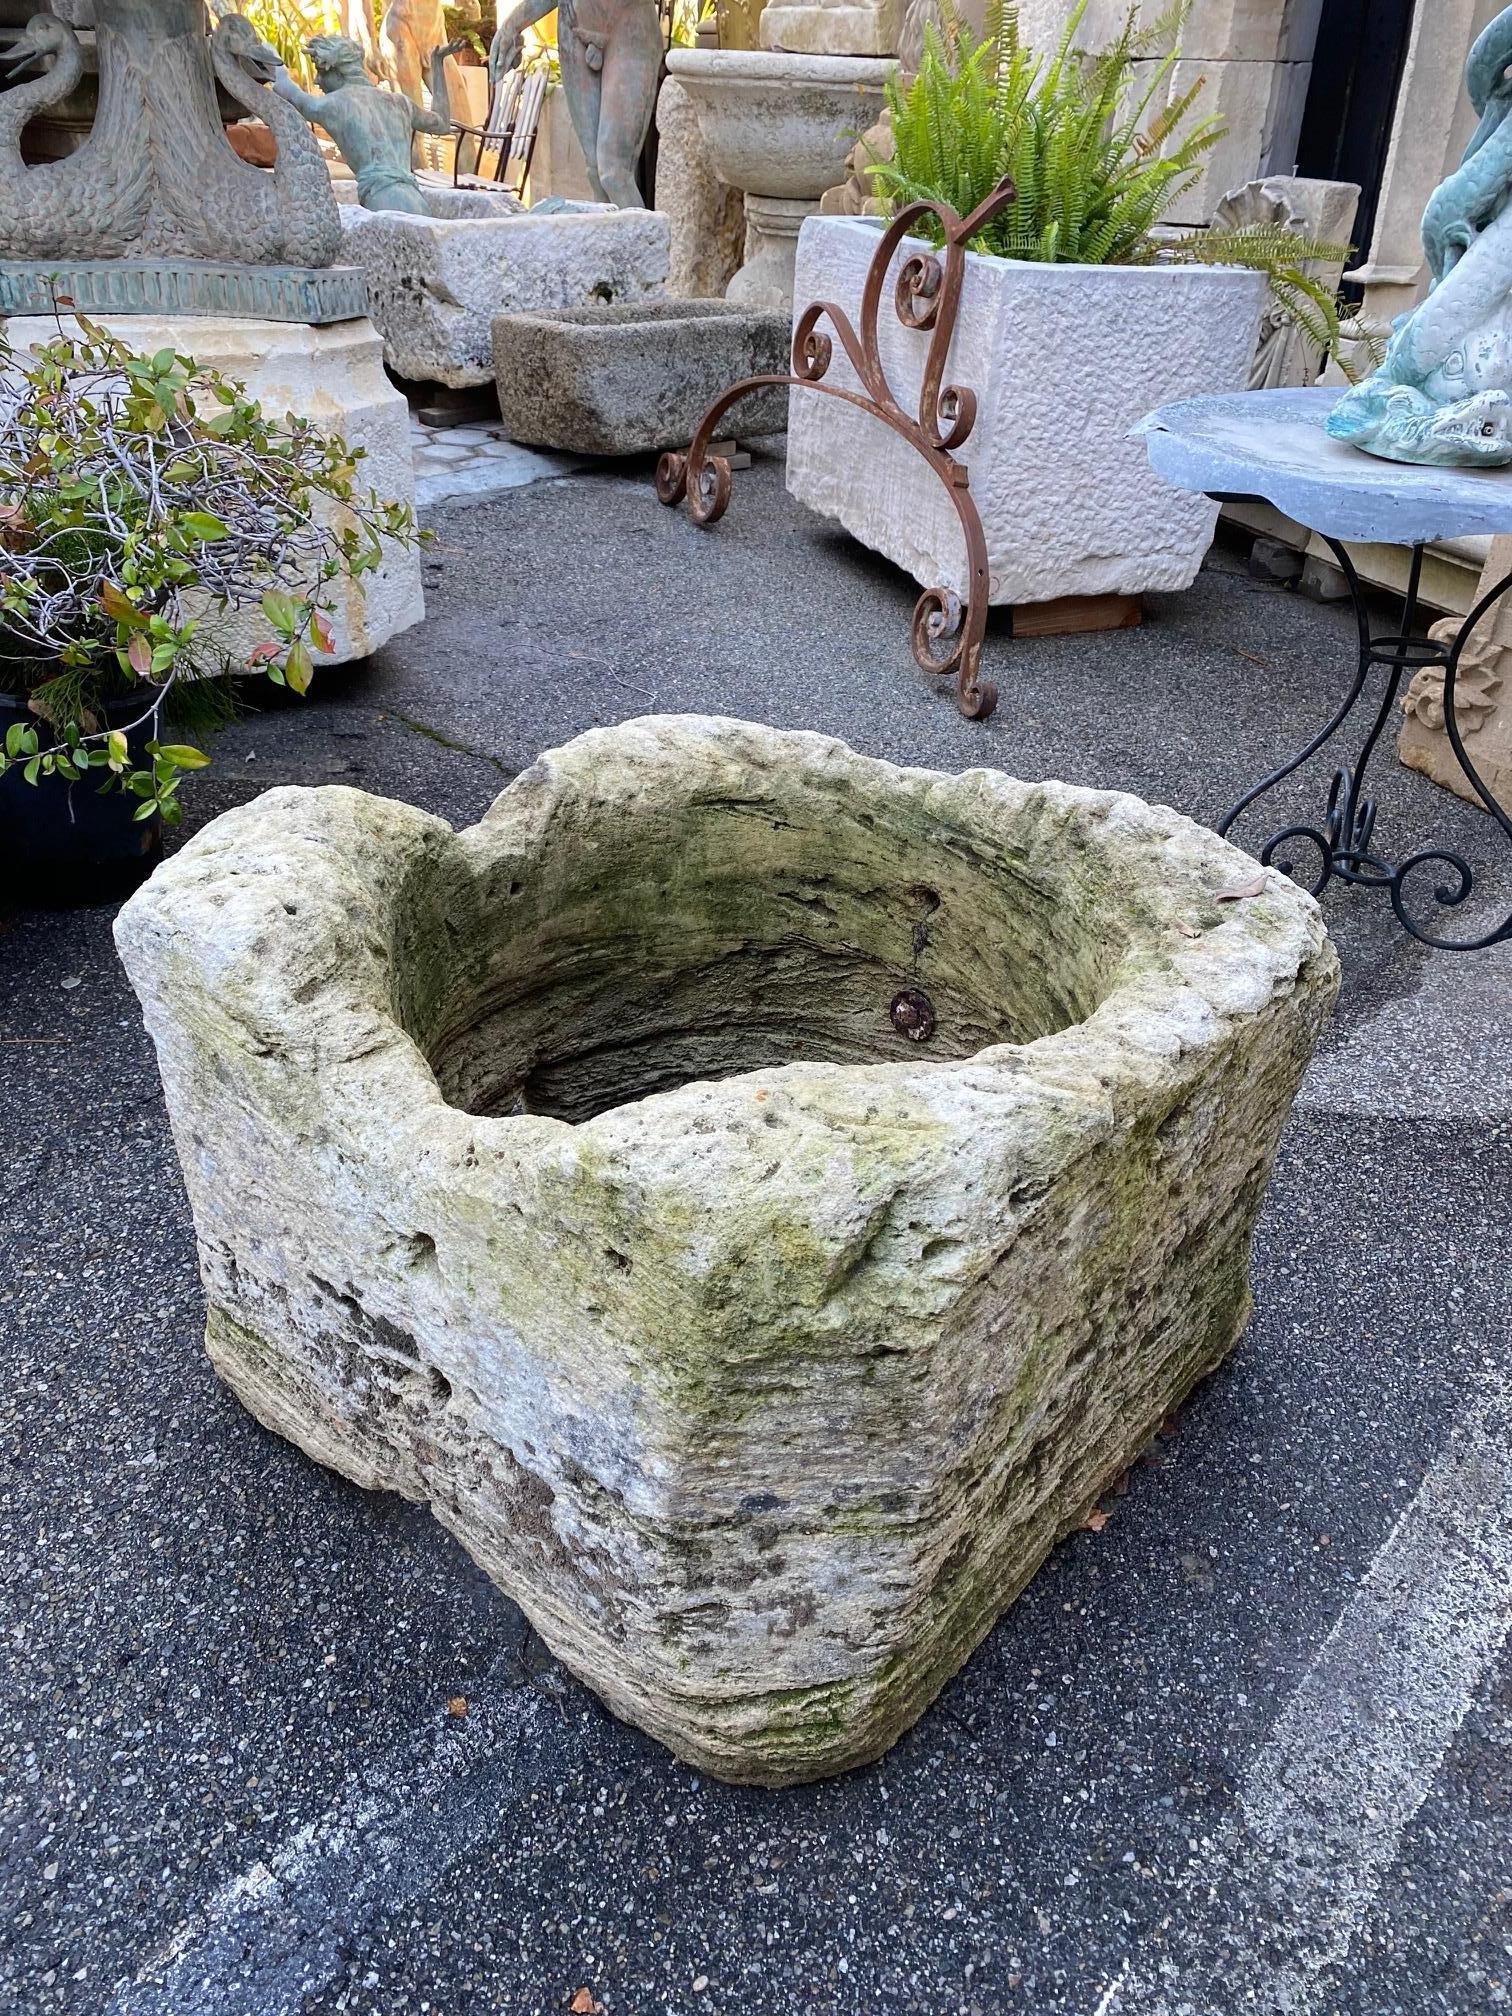 Gothic Wellhead Hand Carved Stone Container Planter Basin Antiques Cachepot Melrose ave